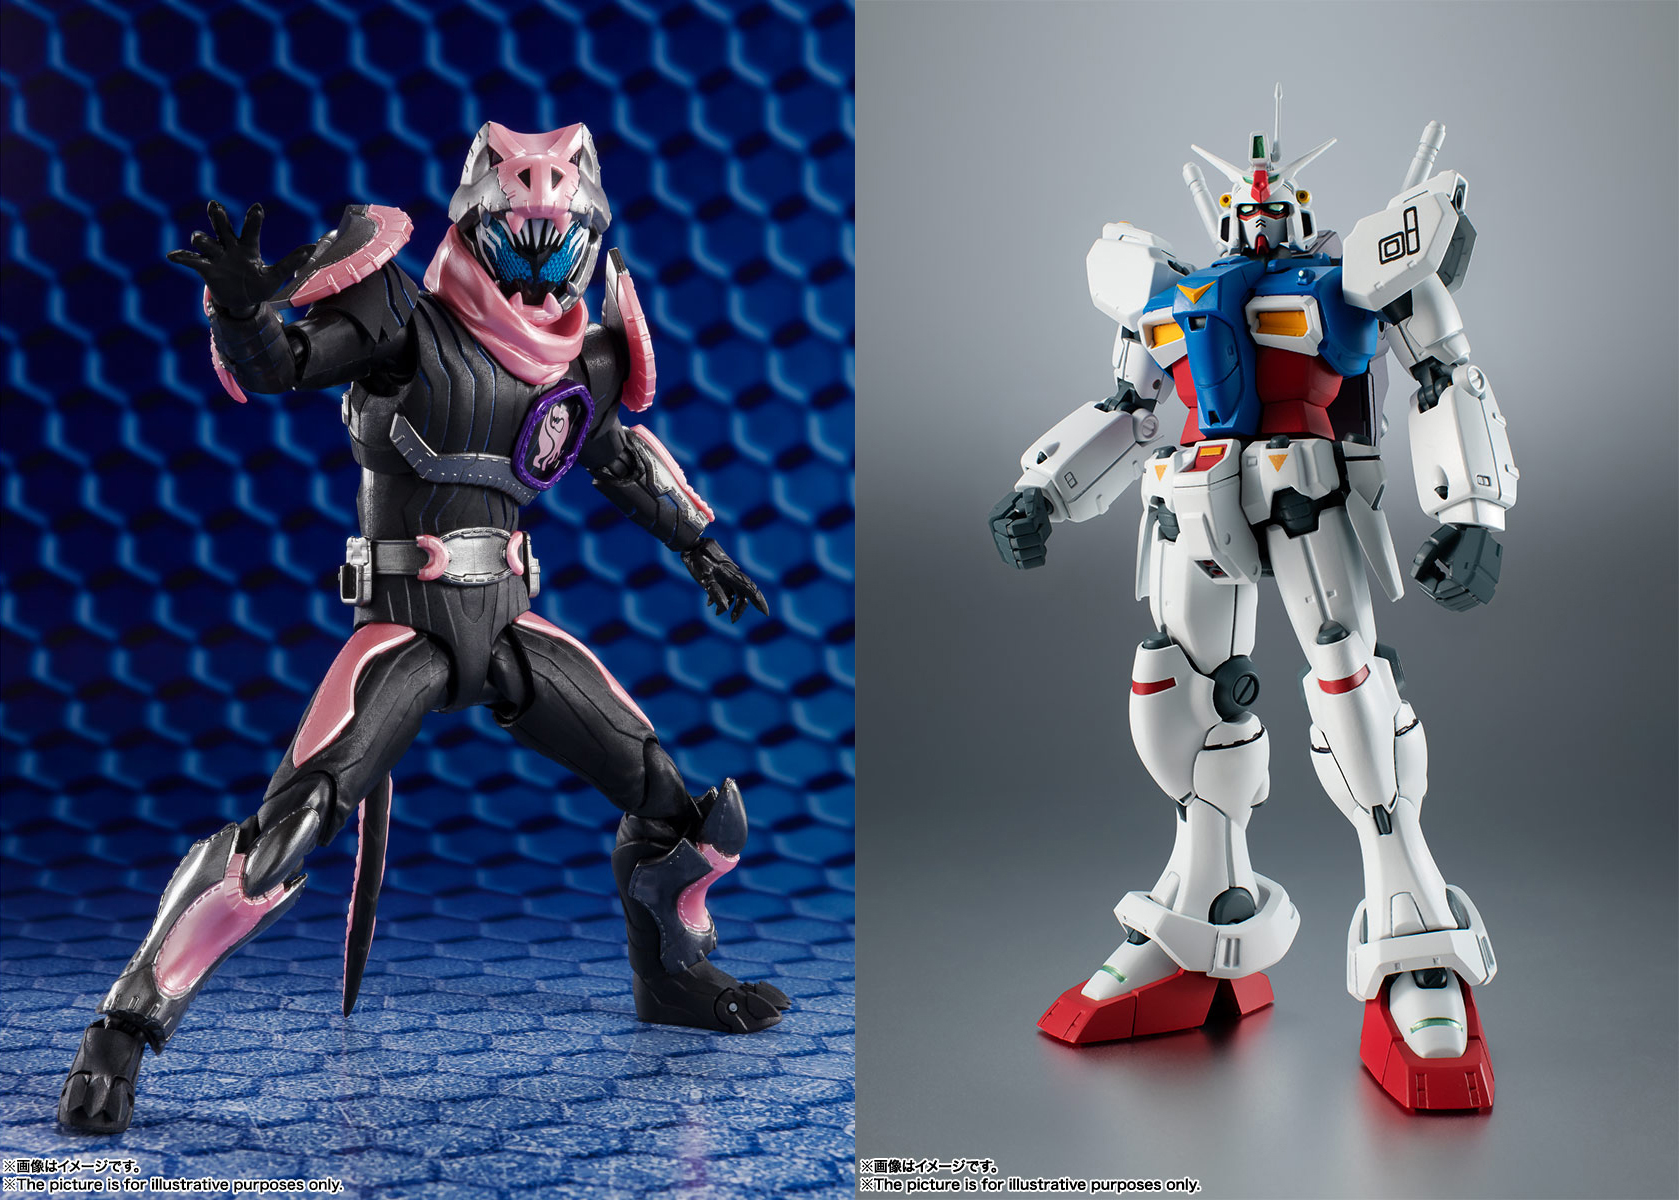 S.H.Figuarts 仮面ライダーバイス レックスゲノム ROBOT魂 ＜SIDE MS＞ RX-78GP01 ガンダム試作1号機 ver. A.N.I.M.E.